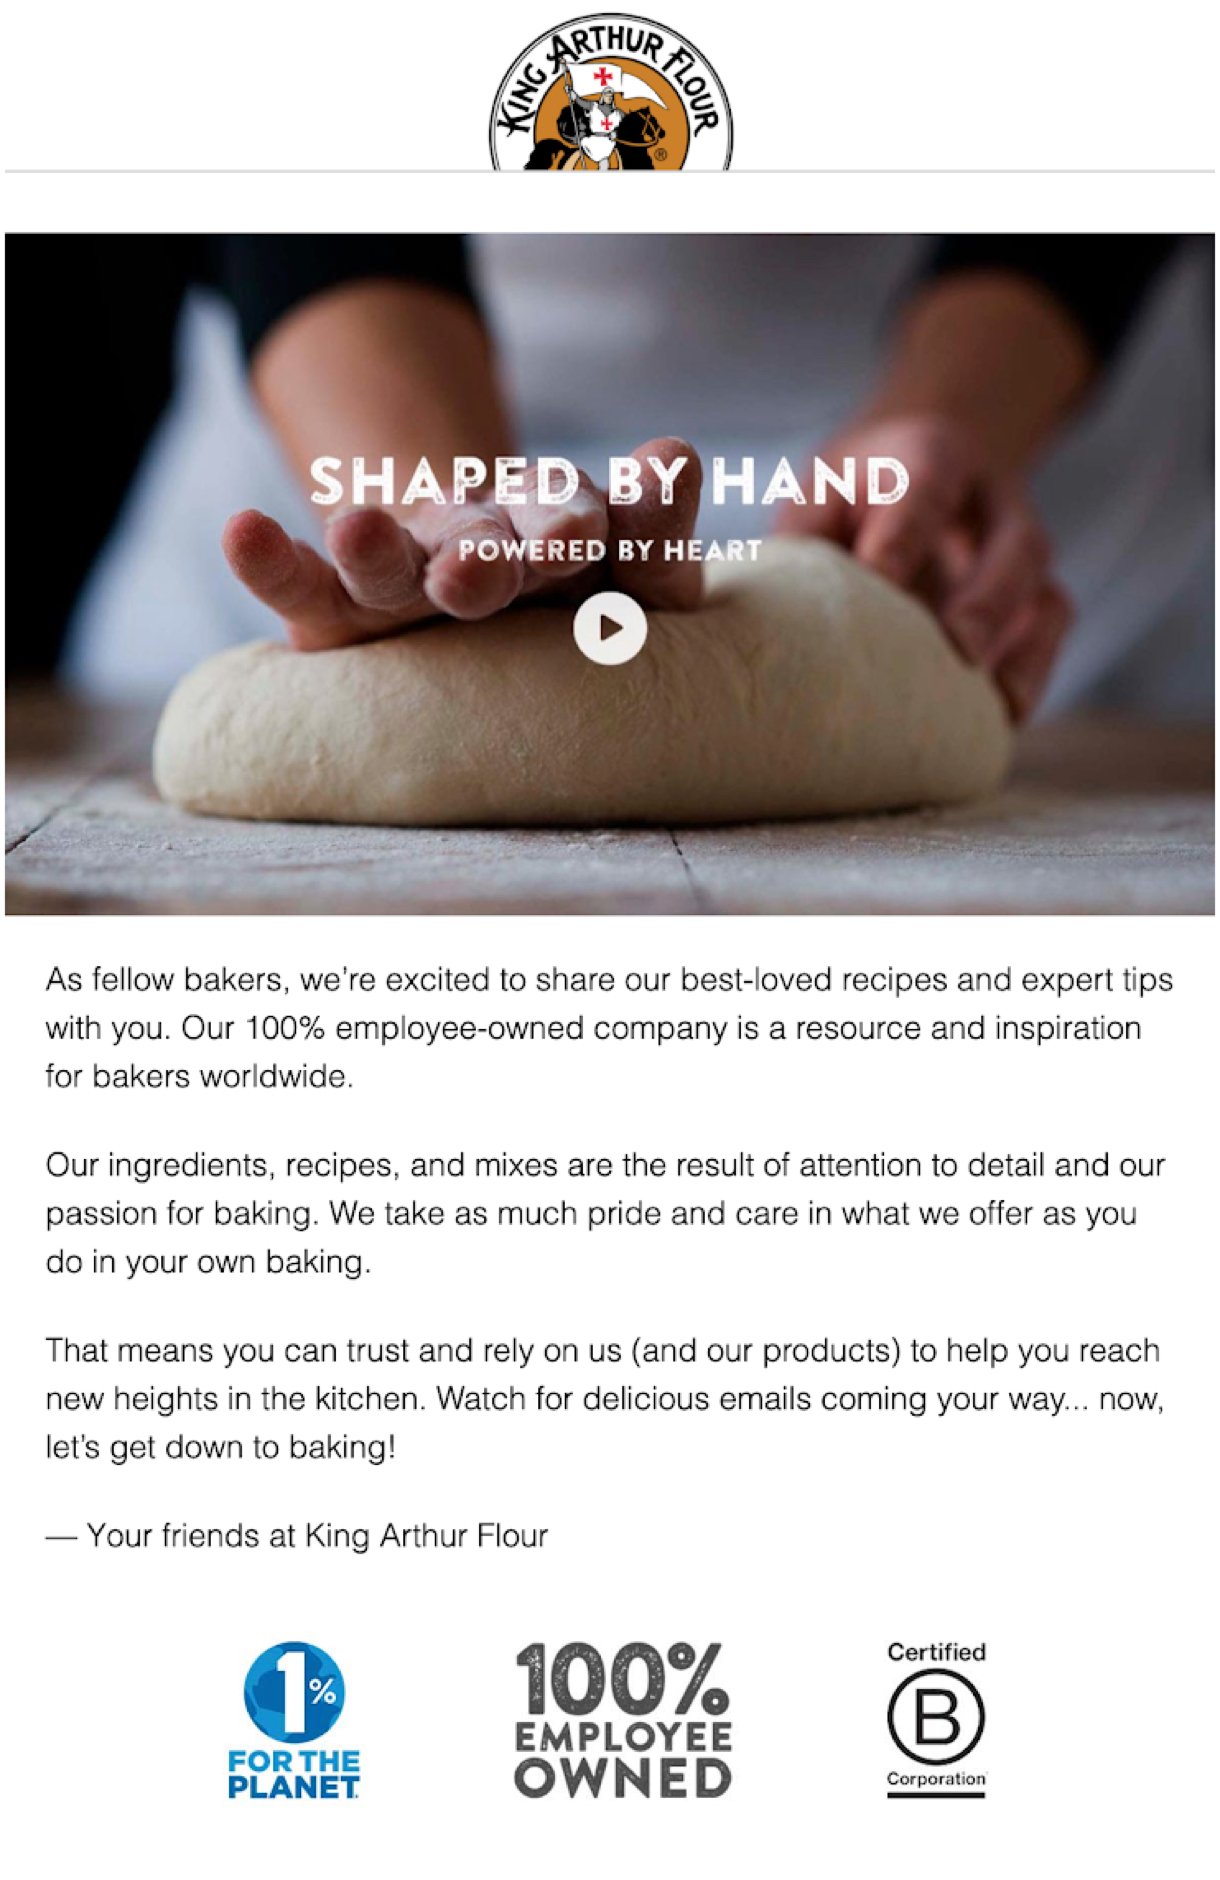 King Arthur Flour welcome email example hands kneading dough